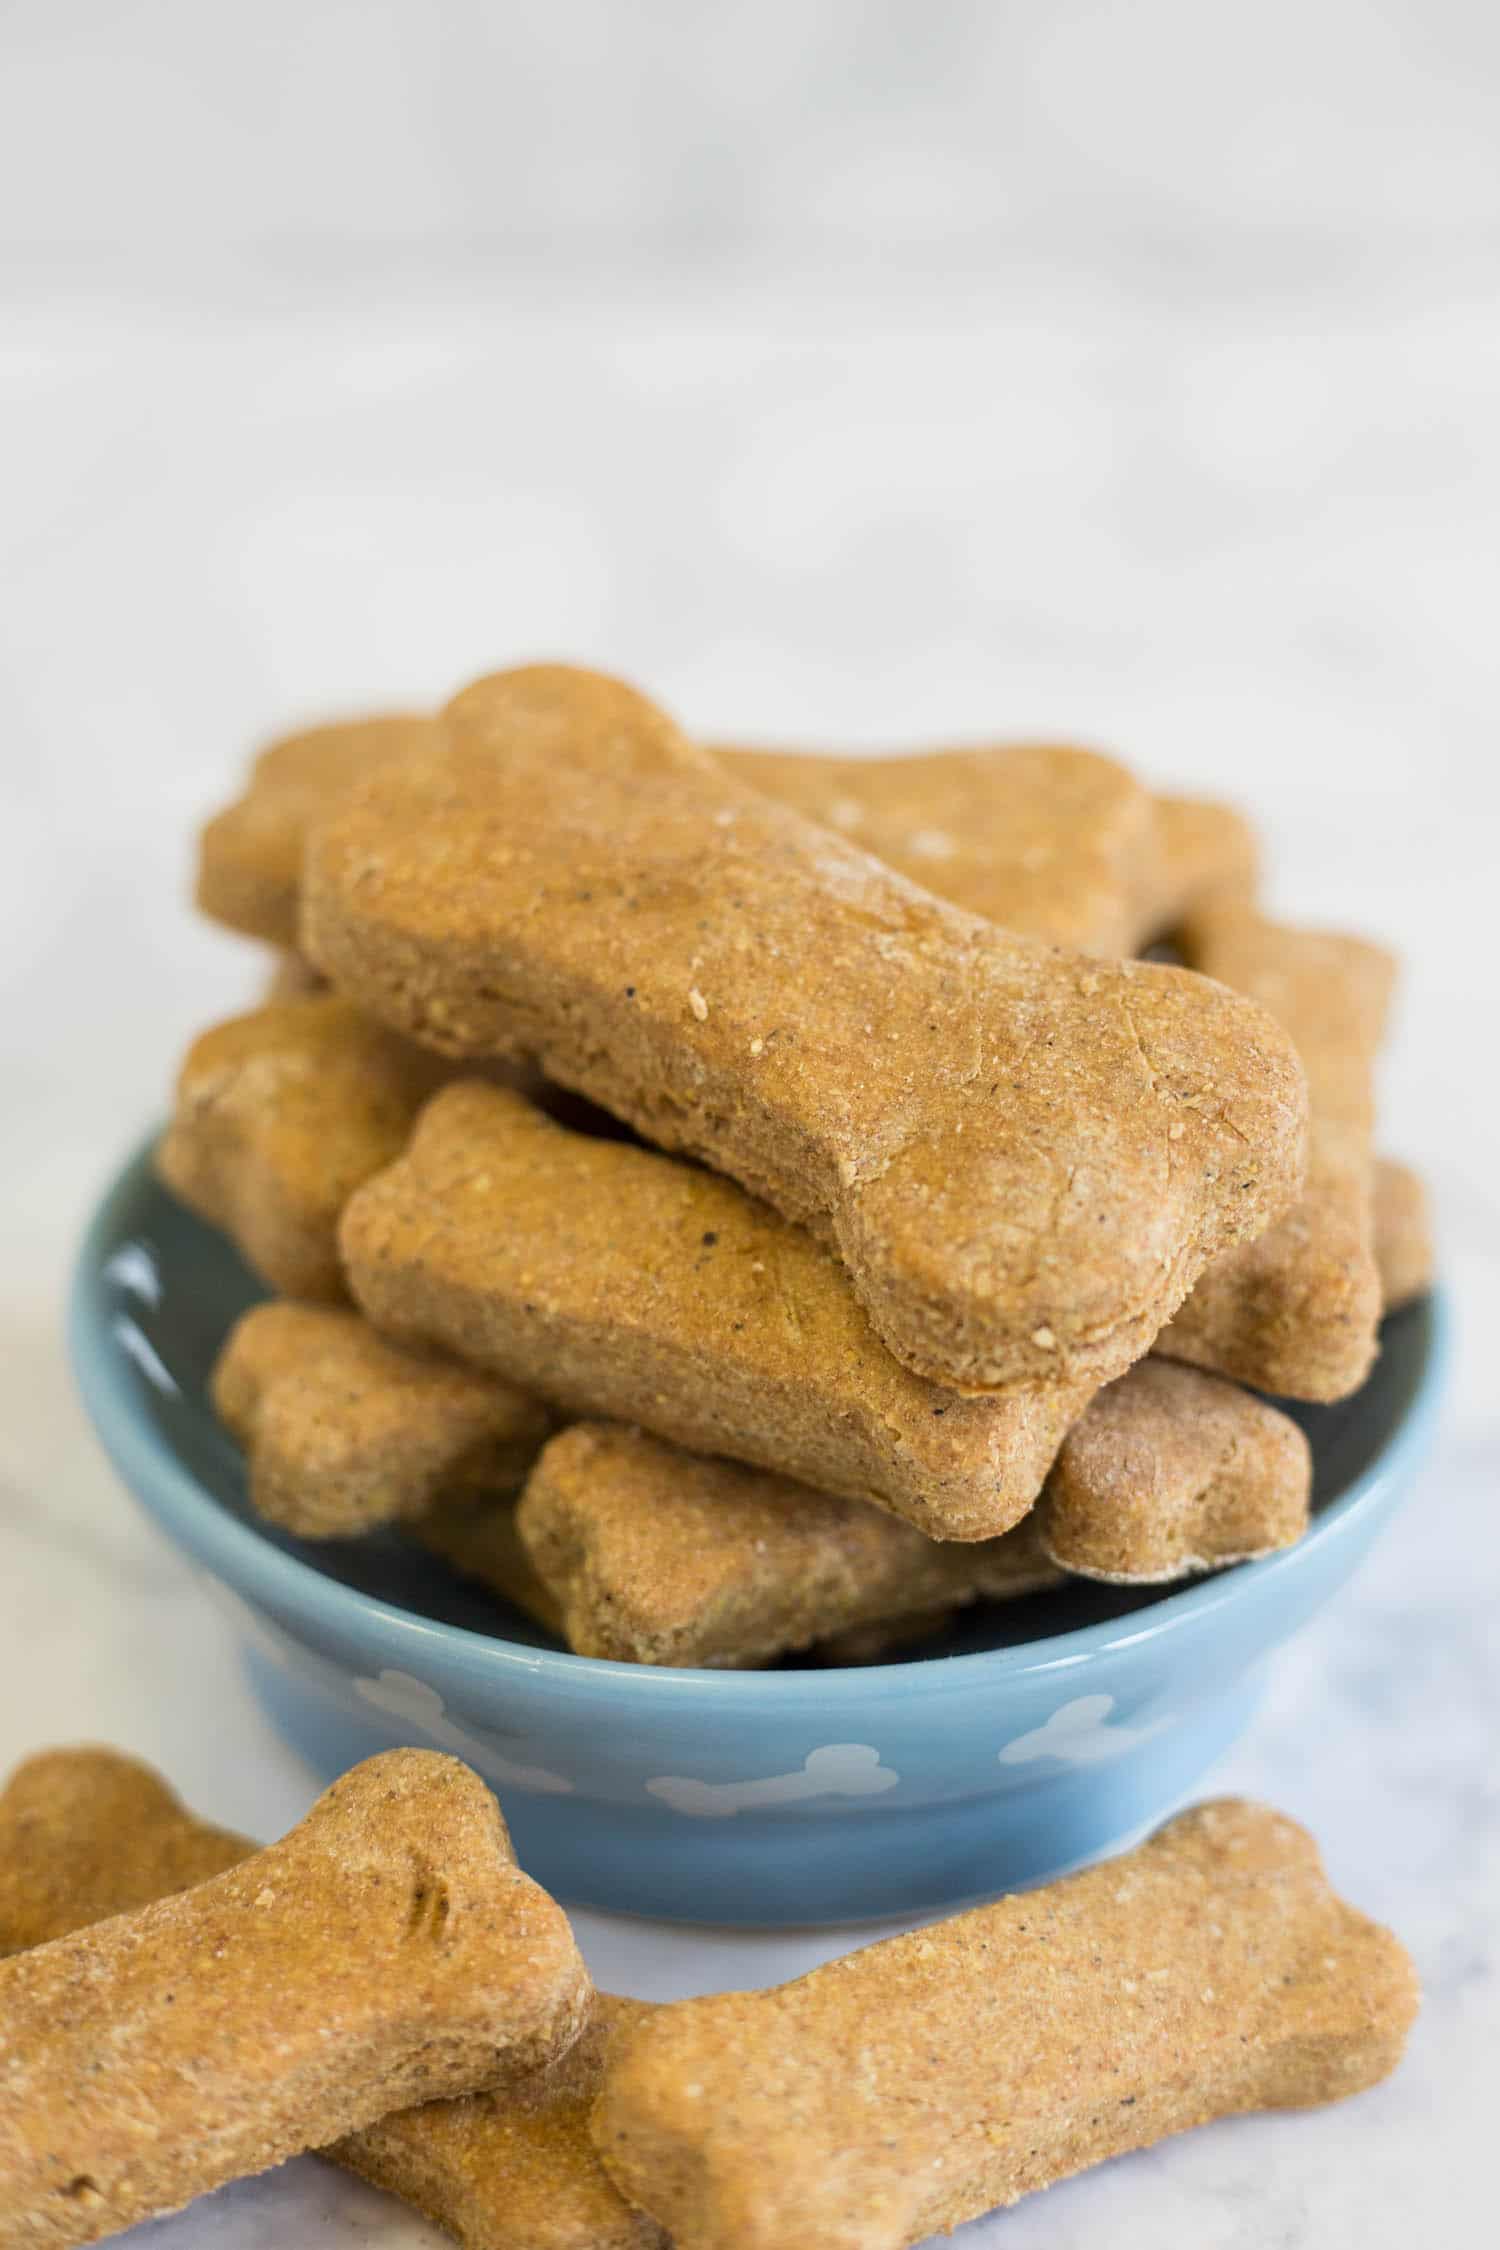 Homemade Dog Biscuits | Artzy Foodie